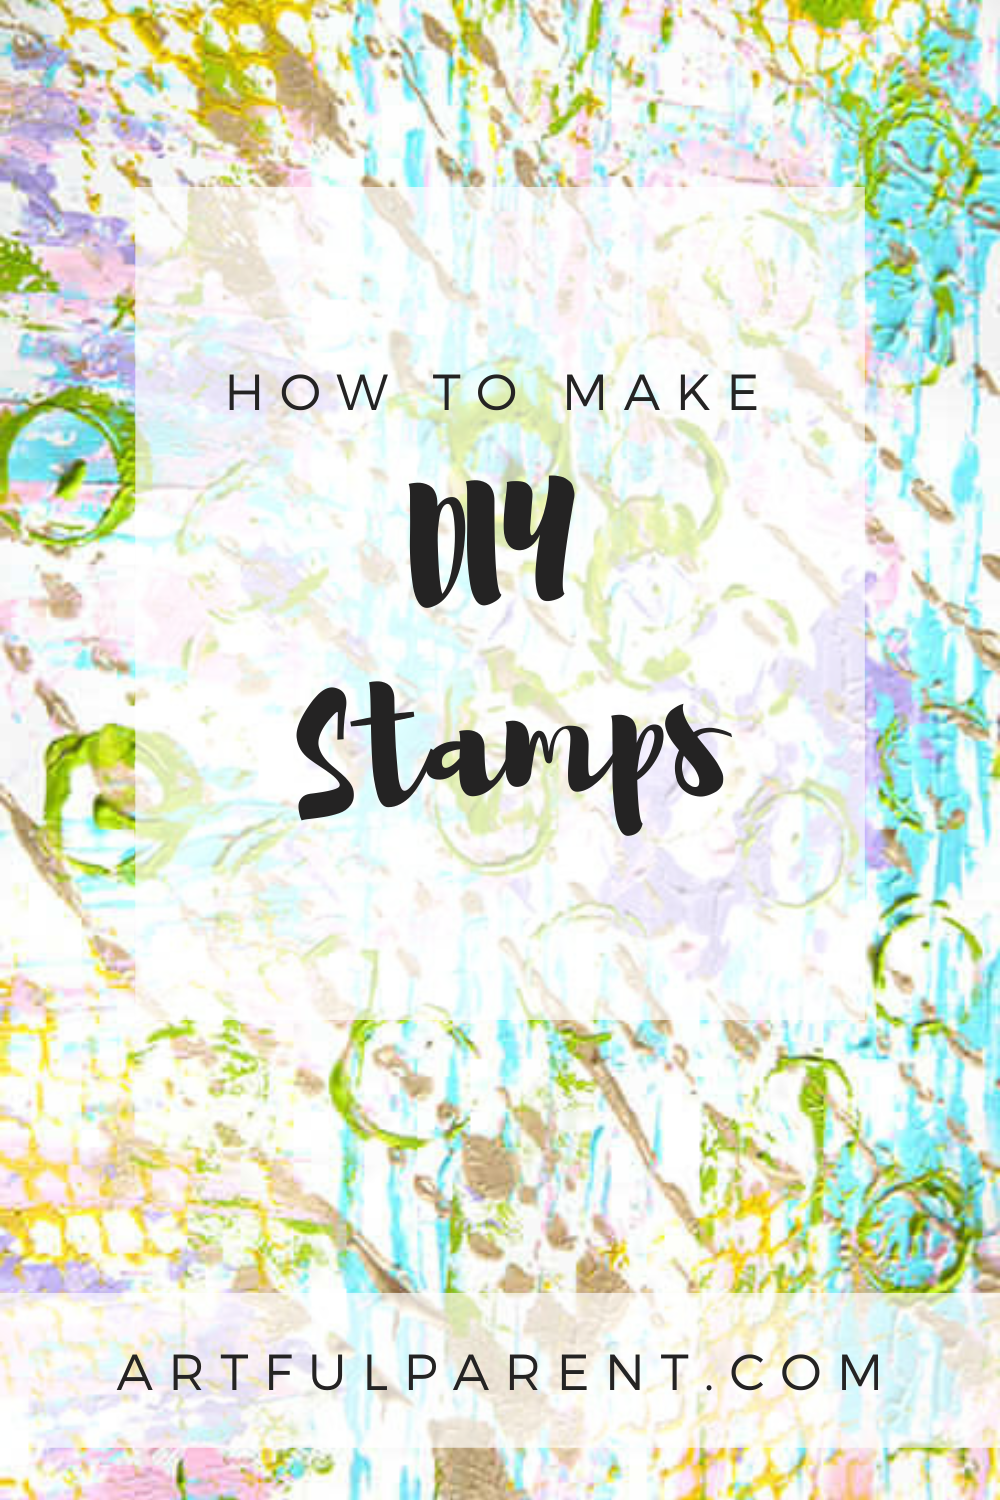 How to Make DIY Stamps with Cardboard